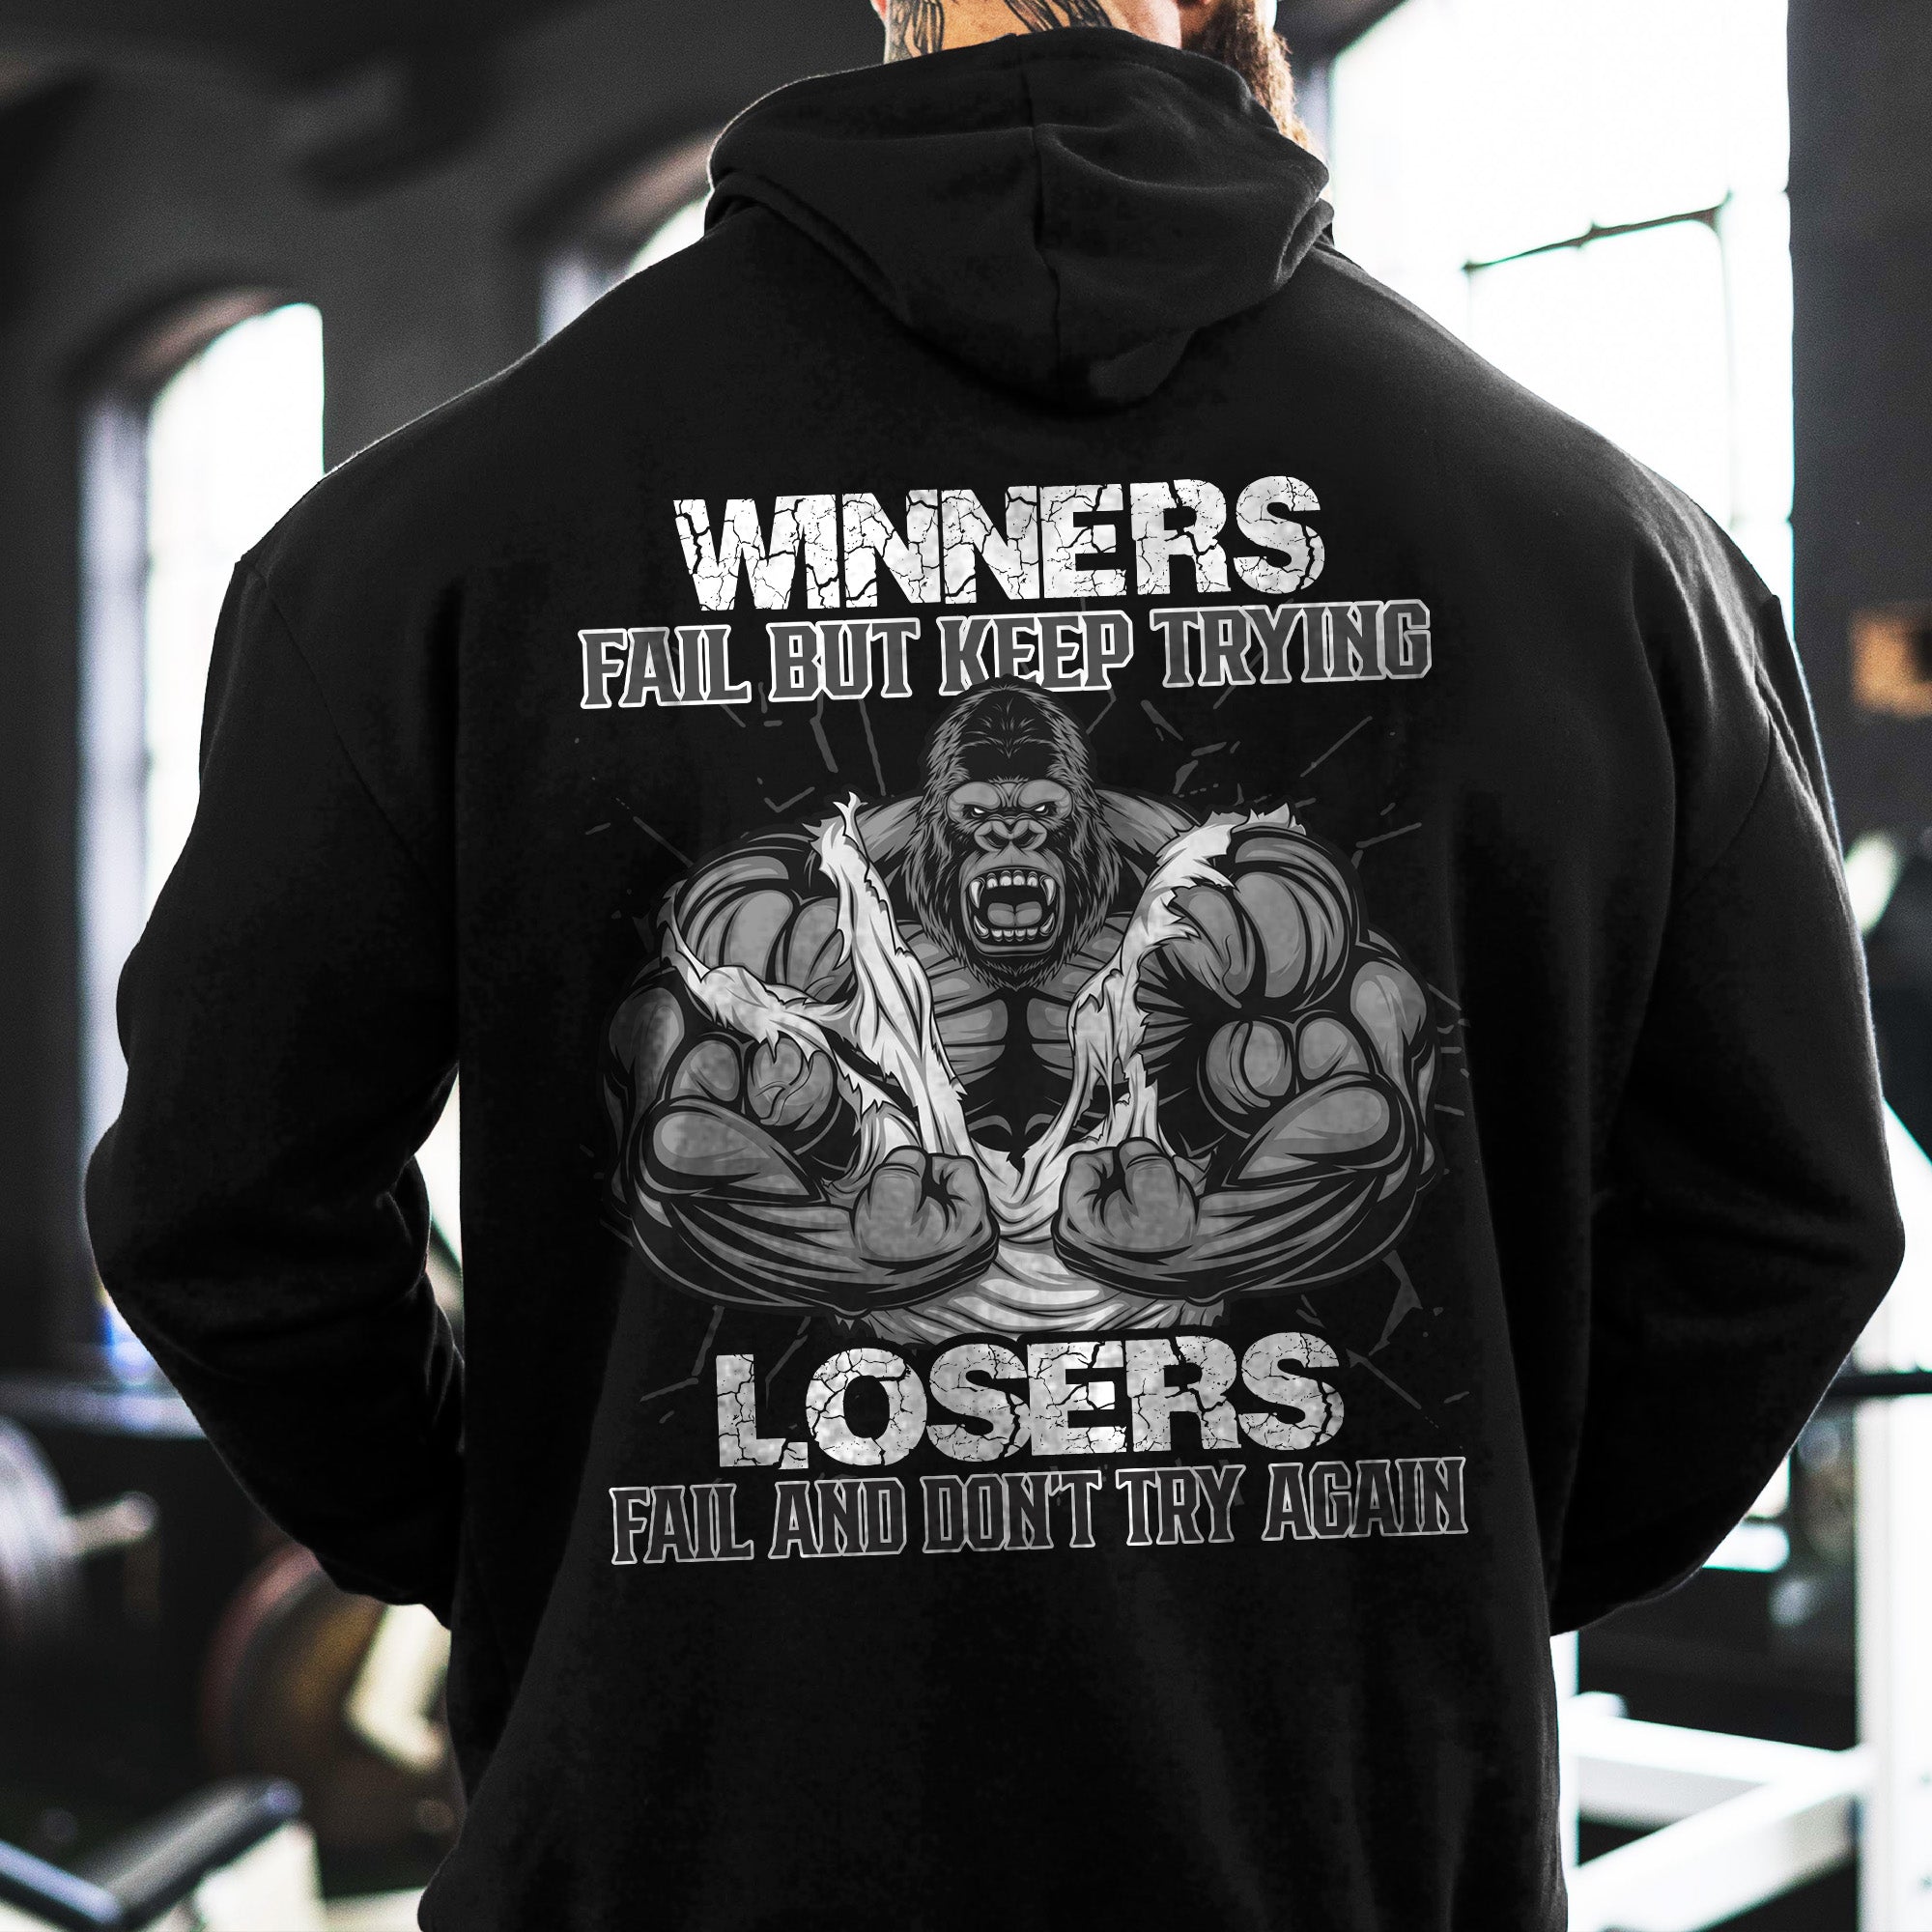 NEW SUPERVILLAIN COMPRESSION SHIRTS DROPPING JULY 26 - CODE BONG - - -  #bodybuilder #bodybuilding #gym #motivation #weightlifting